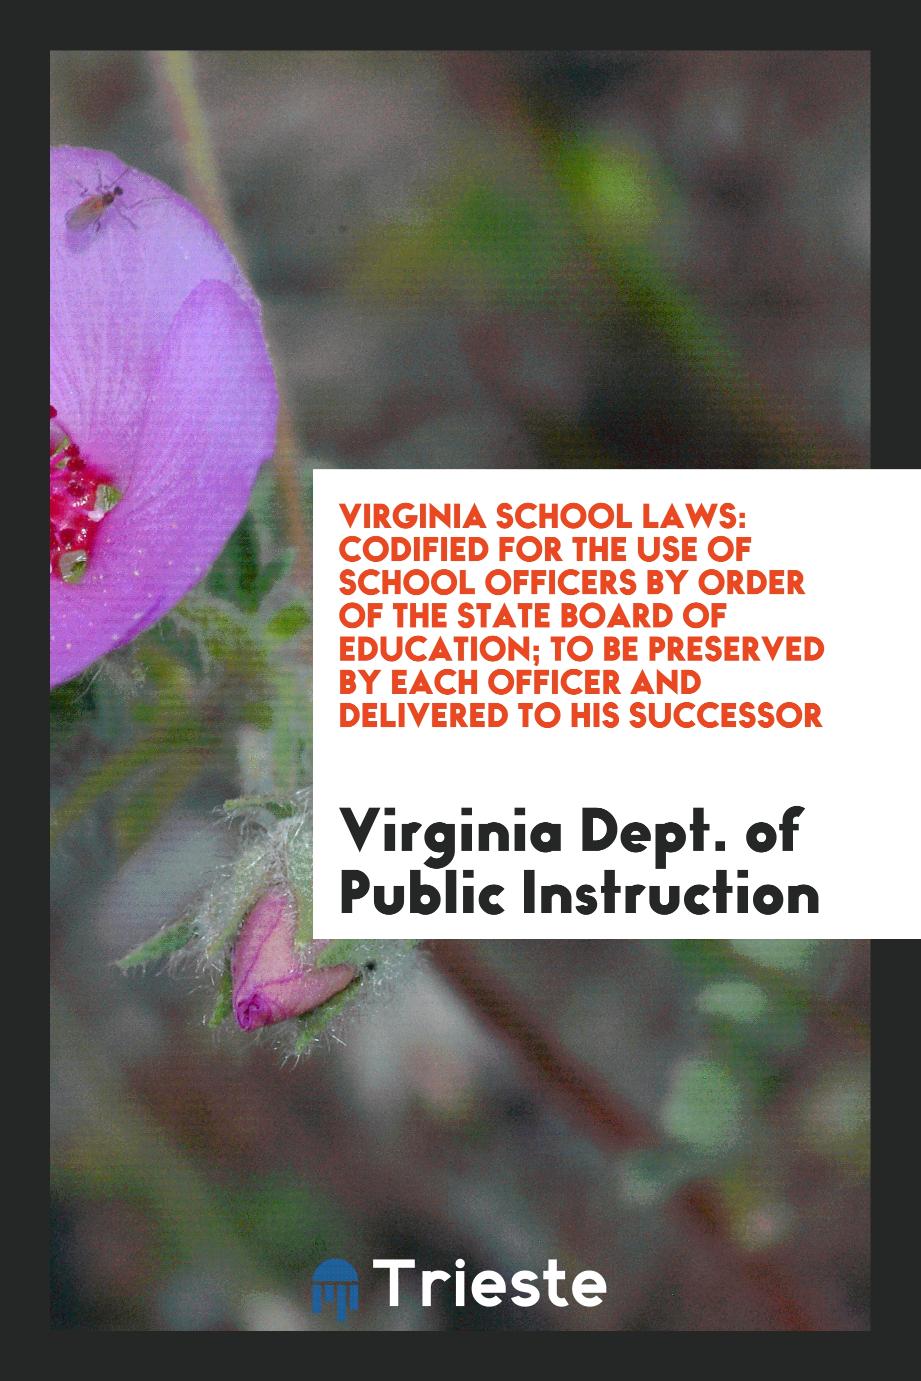 Virginia School Laws: Codified for the Use of School Officers by Order of the State Board of Education; To Be Preserved by Each Officer and Delivered to His Successor